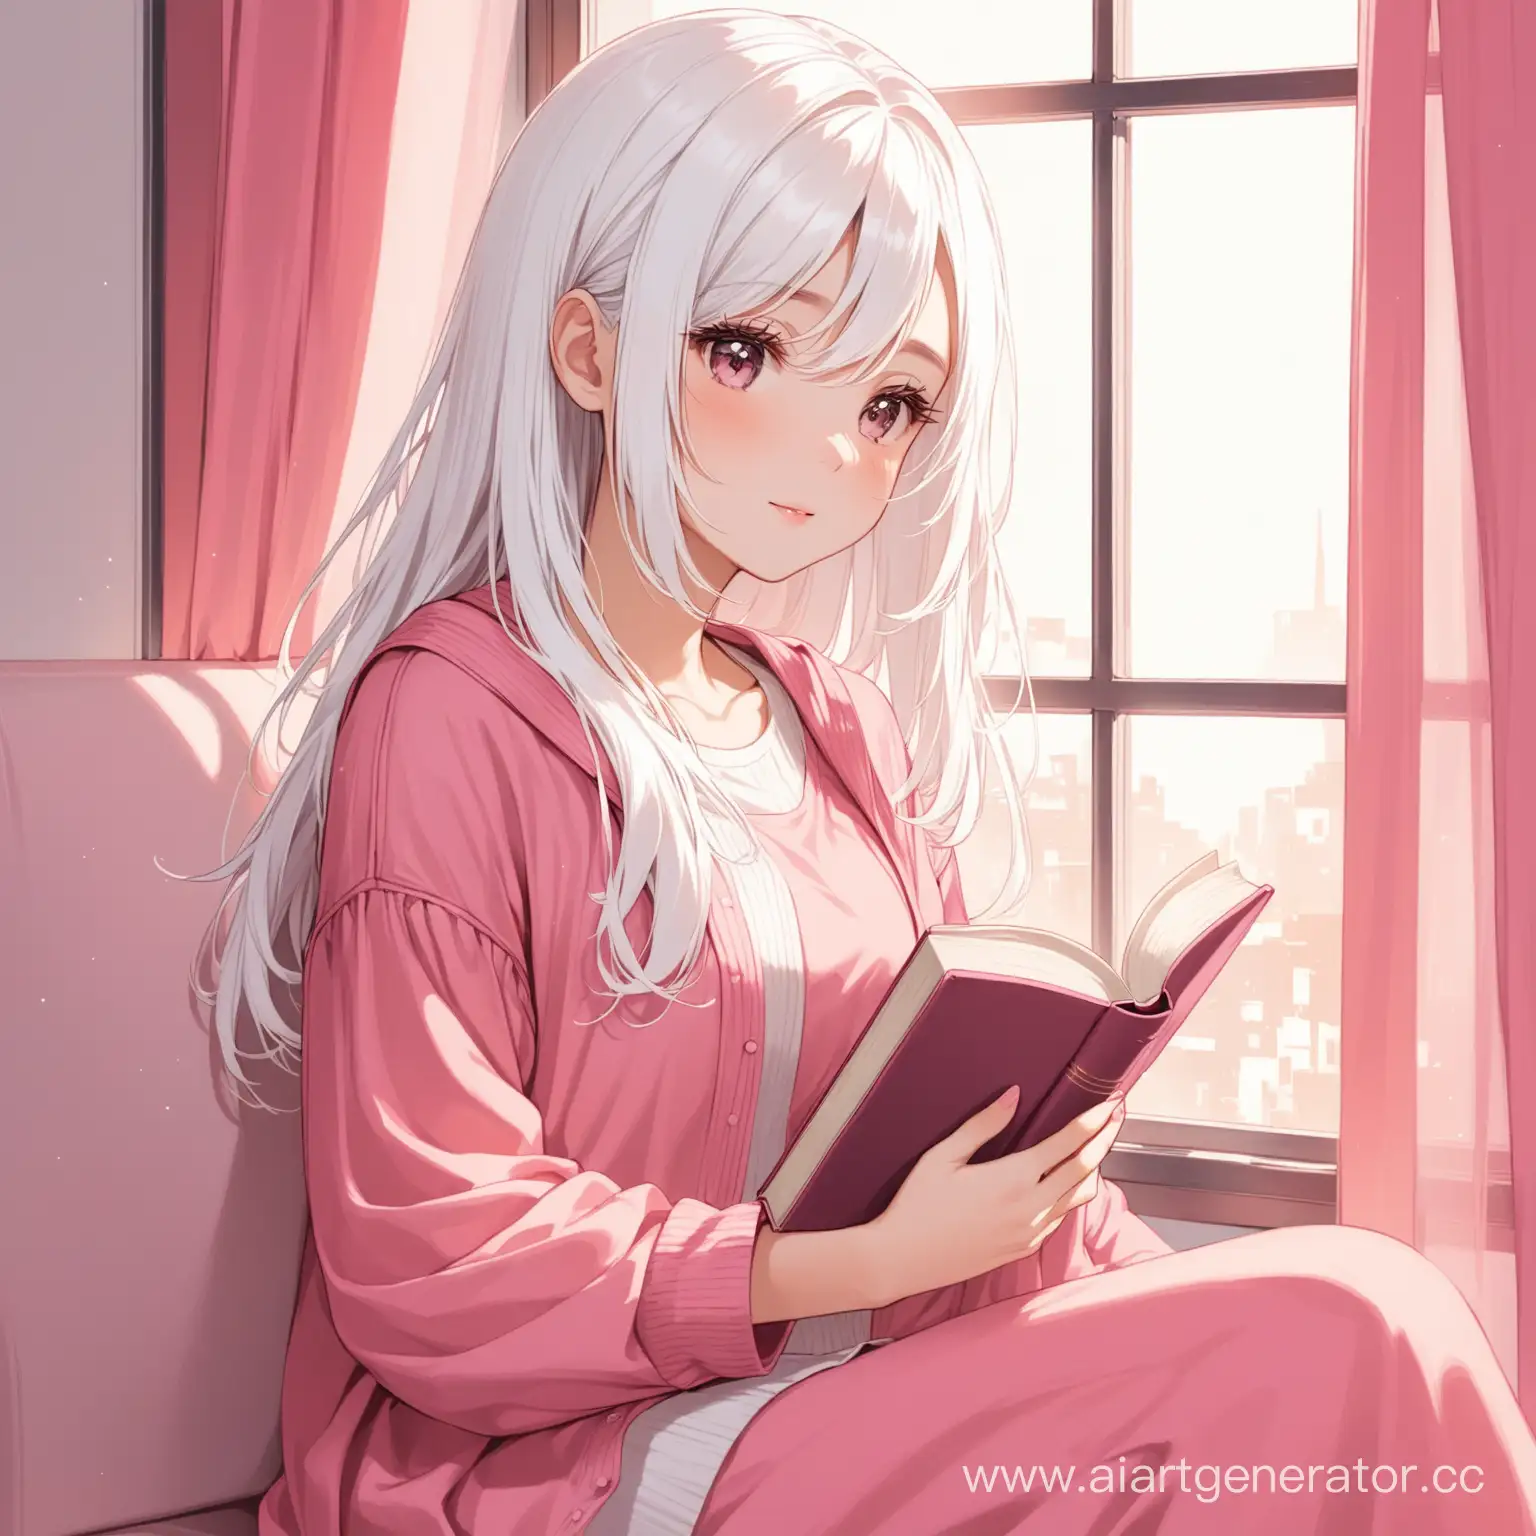 Girl-with-White-Hair-Reading-by-a-Sunlit-Window-in-Soft-Pink-Ambiance